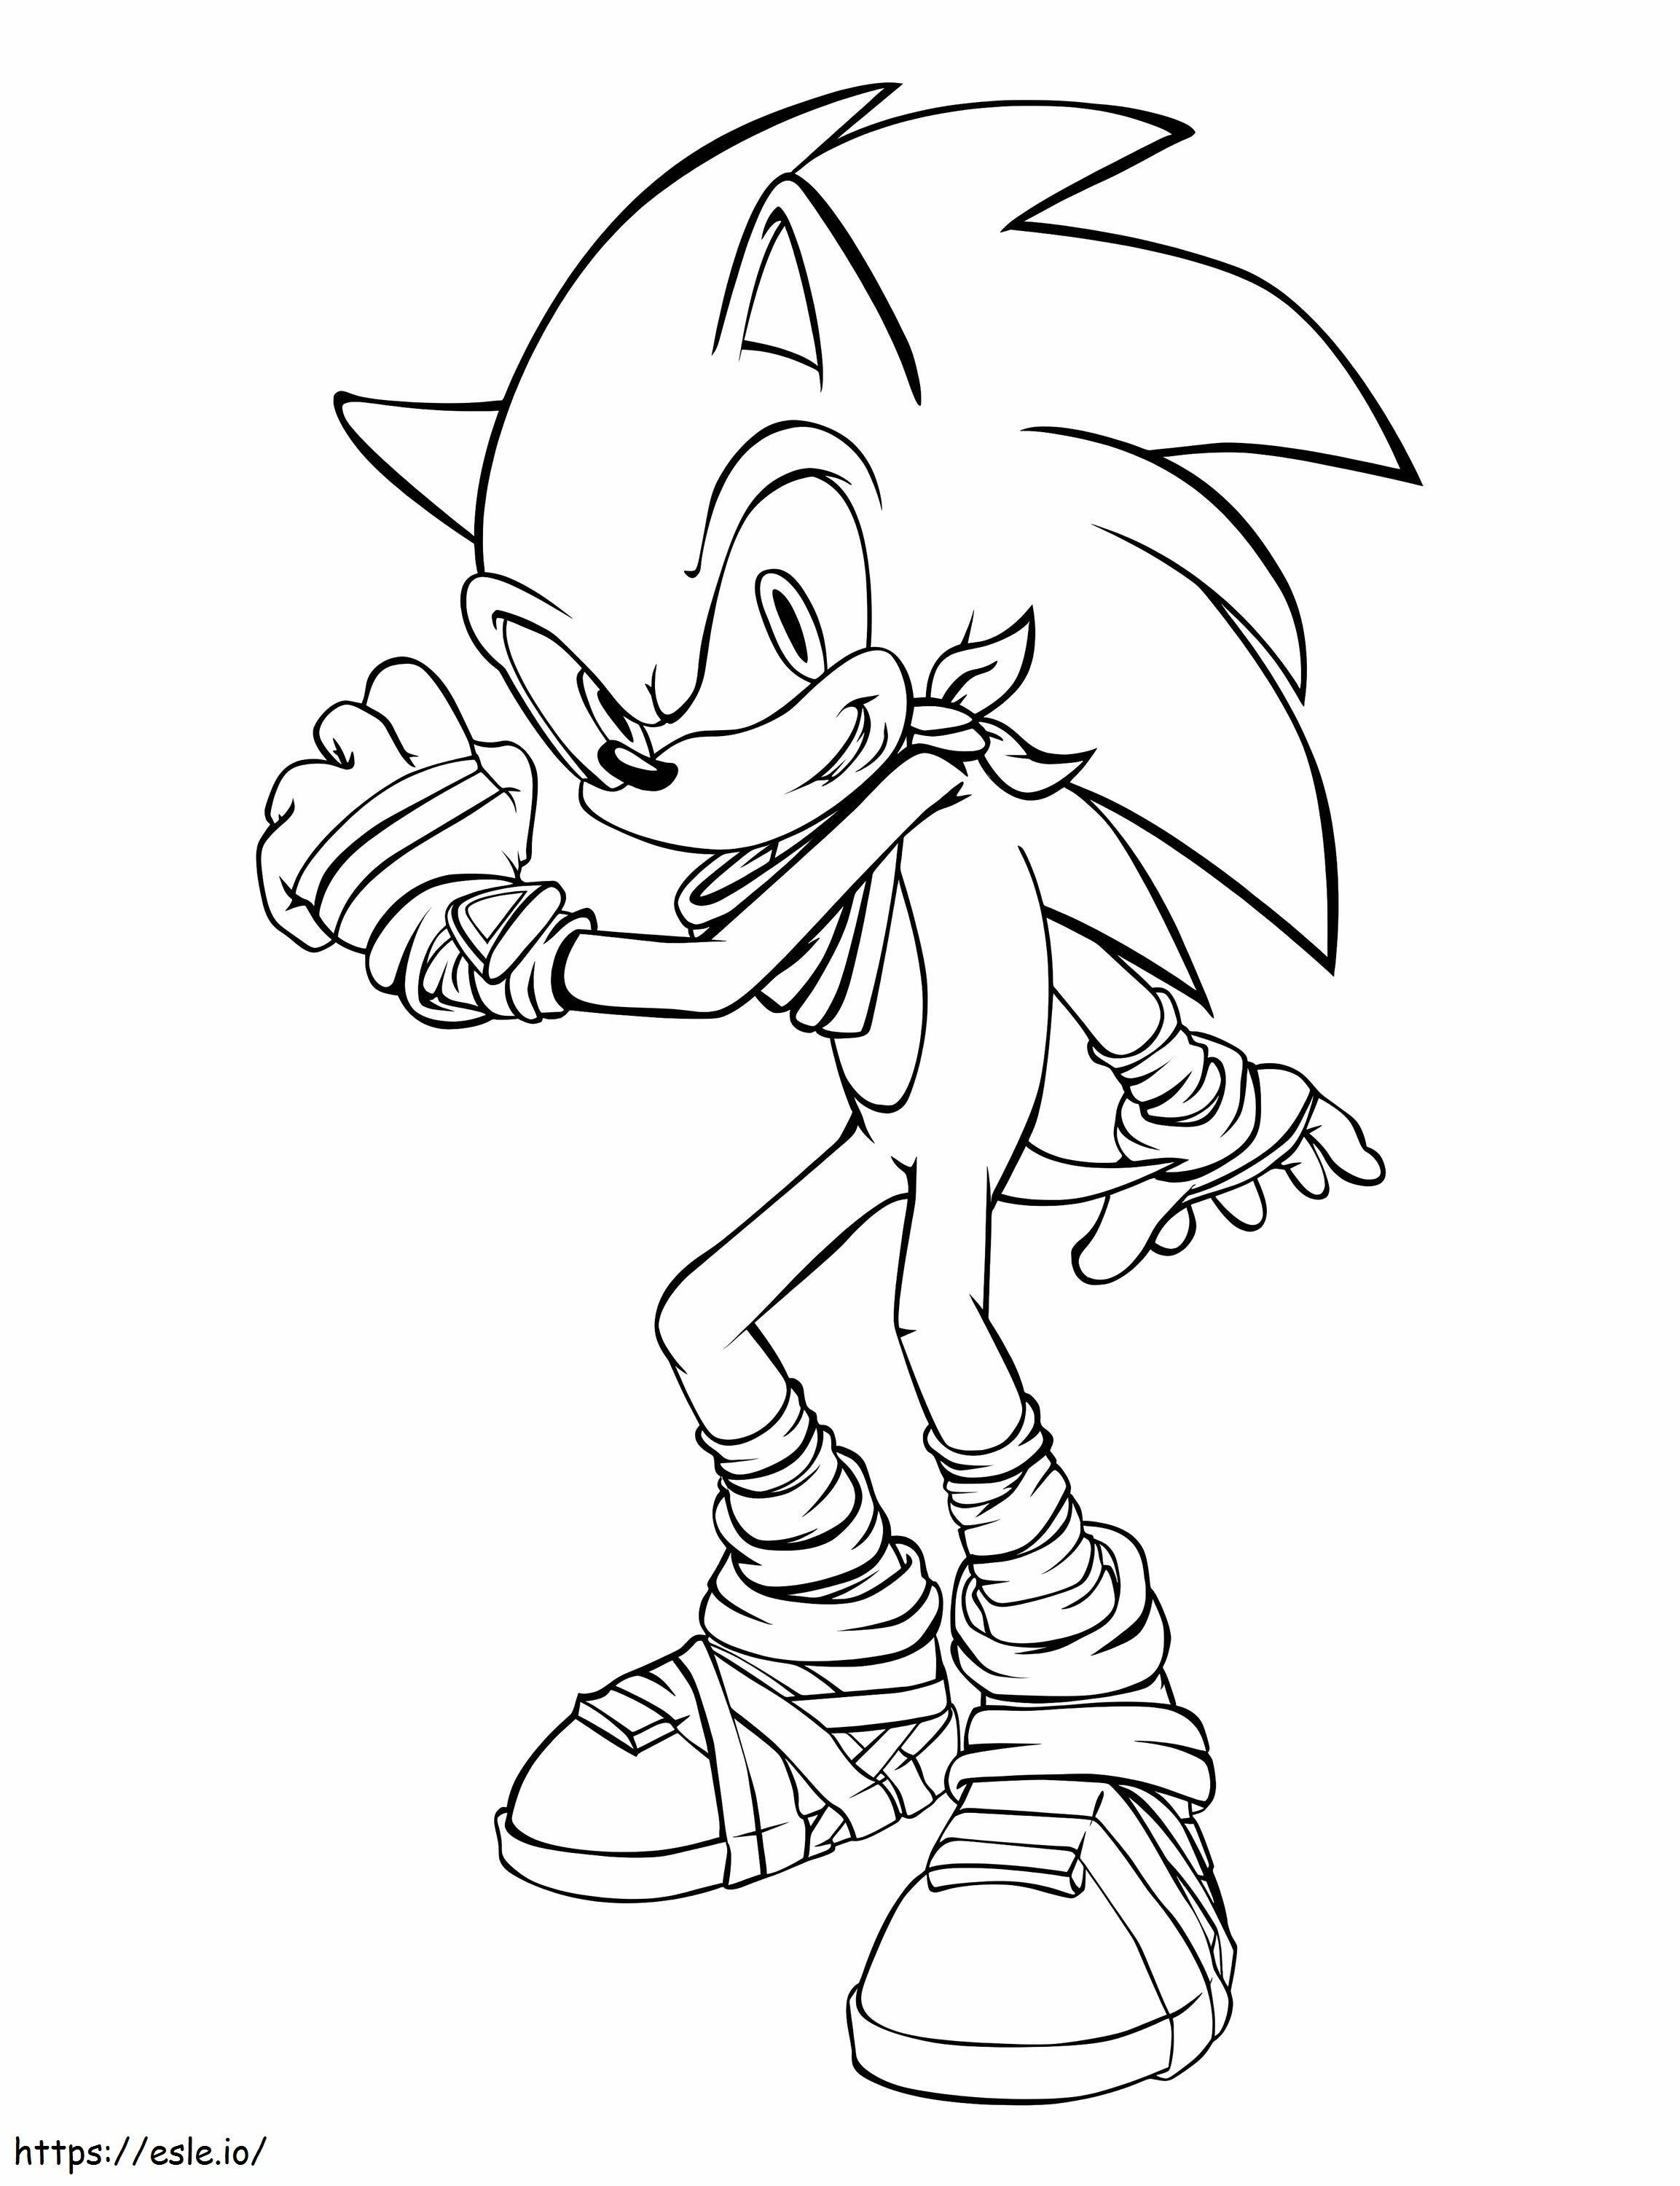 Amazing Sonic Hedgehog coloring page